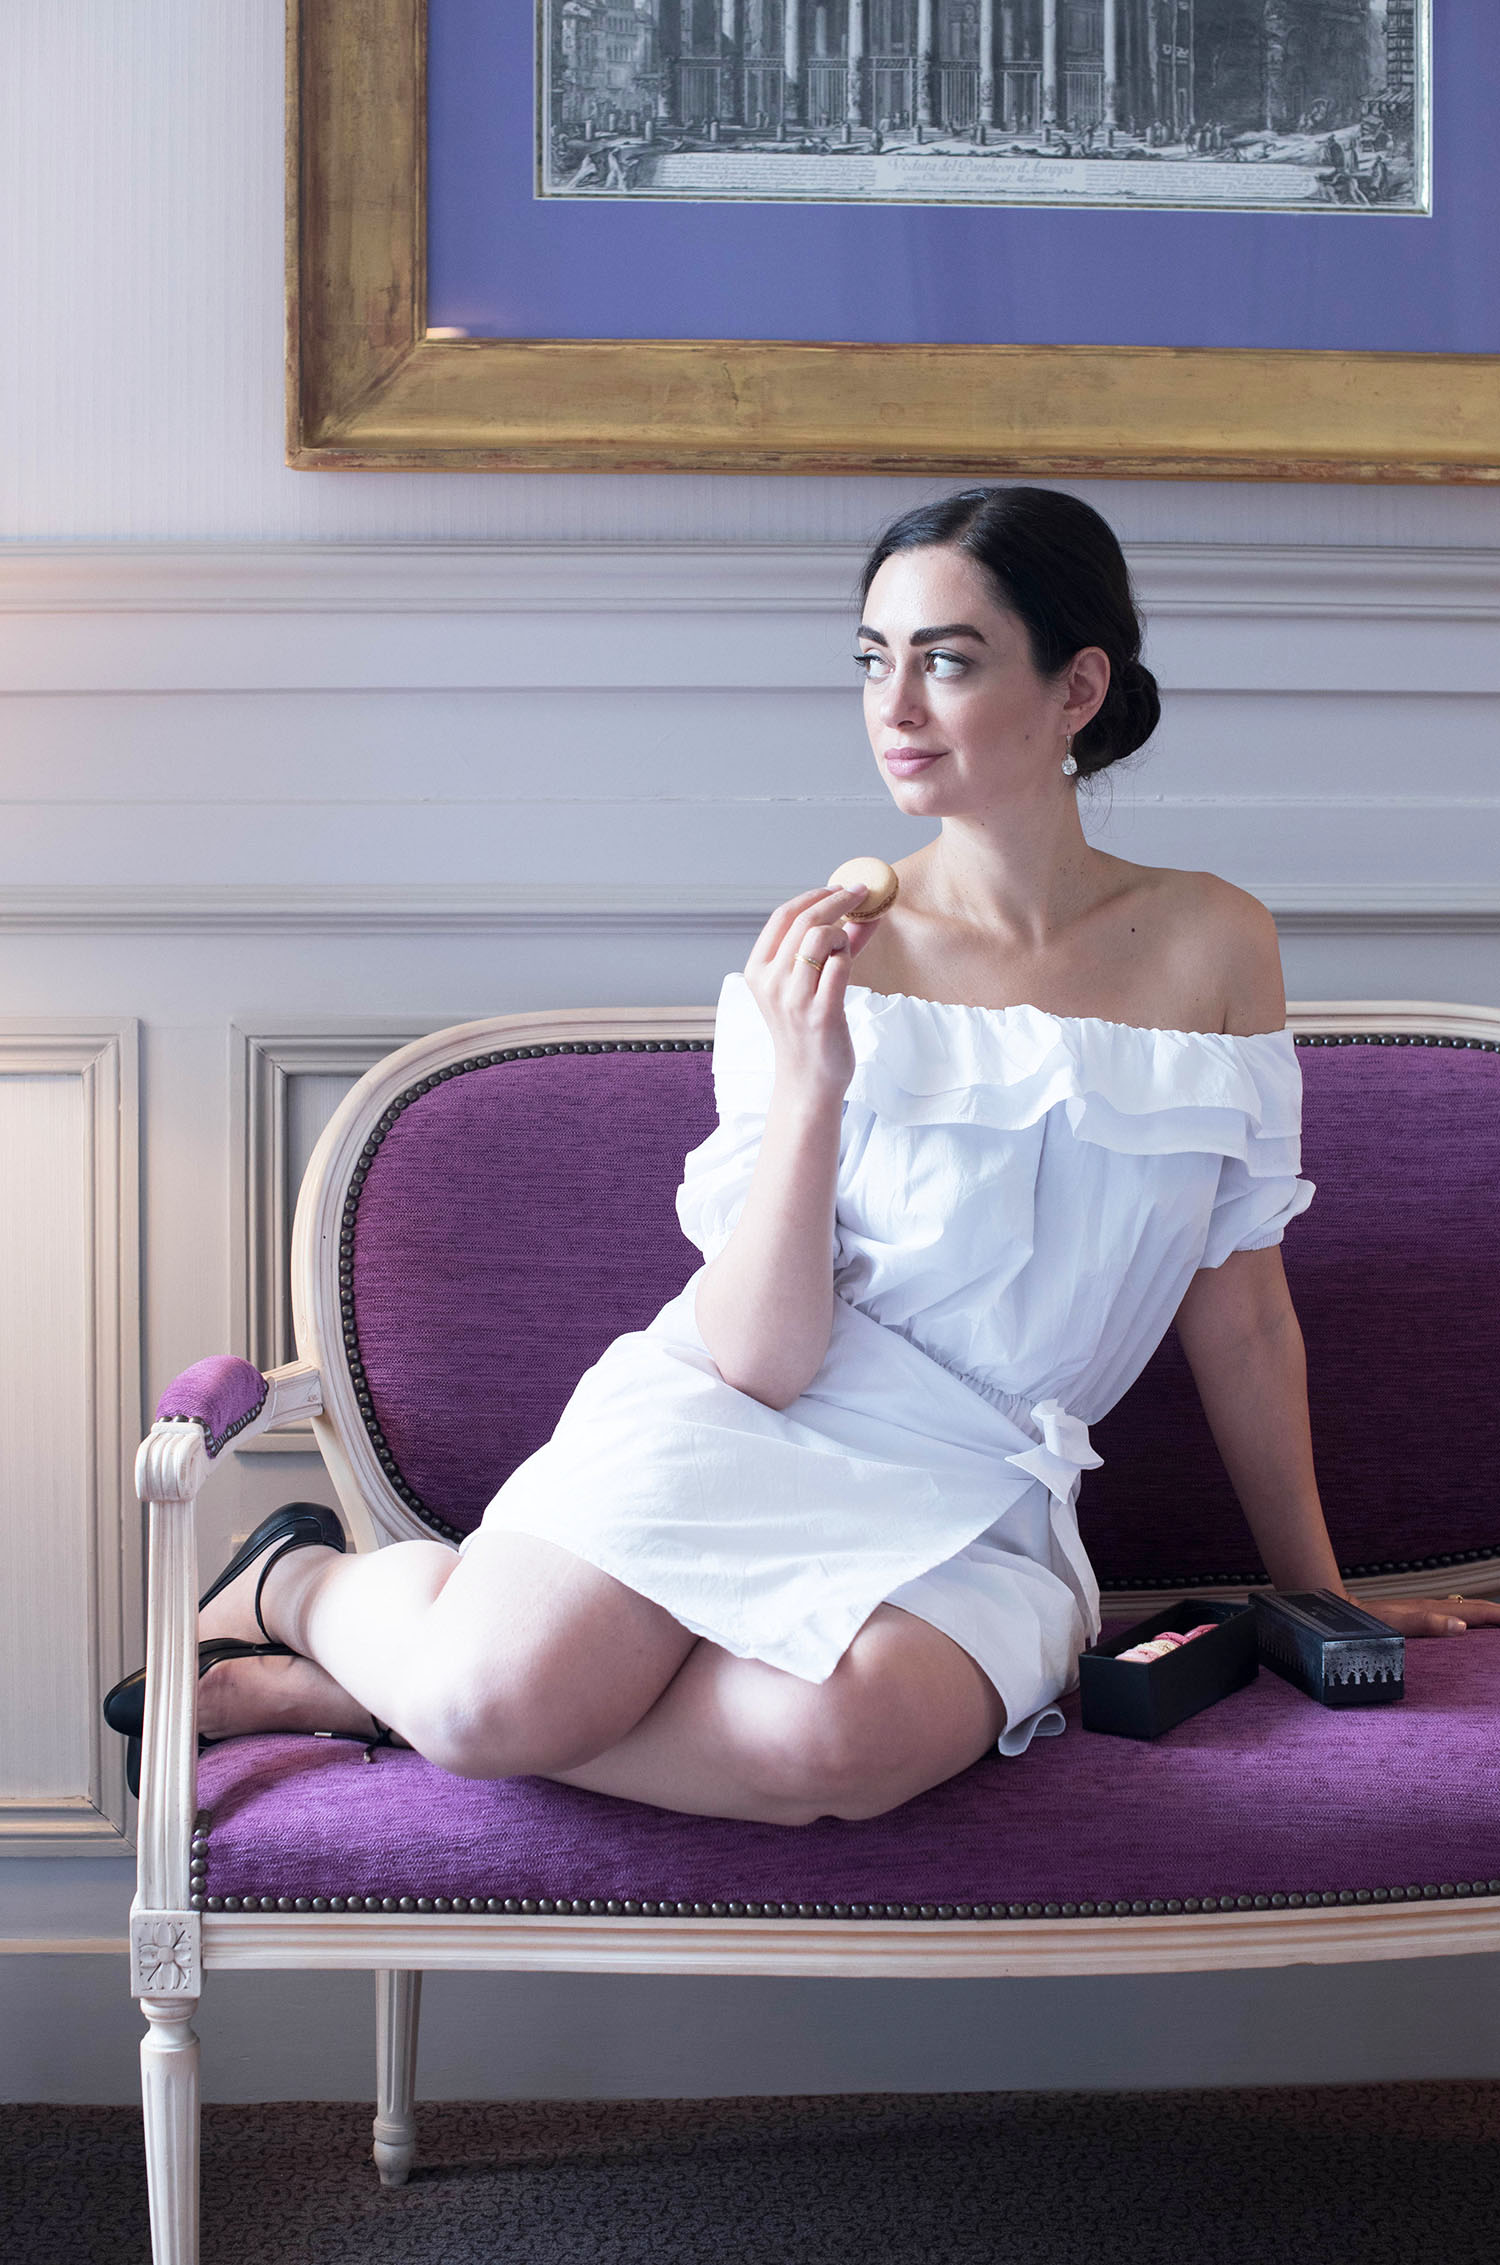 Cee Fardoe, the fashion blogger behind Coco & Vera, sits on a Louis XVI bench eating Laduree macarons while wearing a white dress from REVOLVE